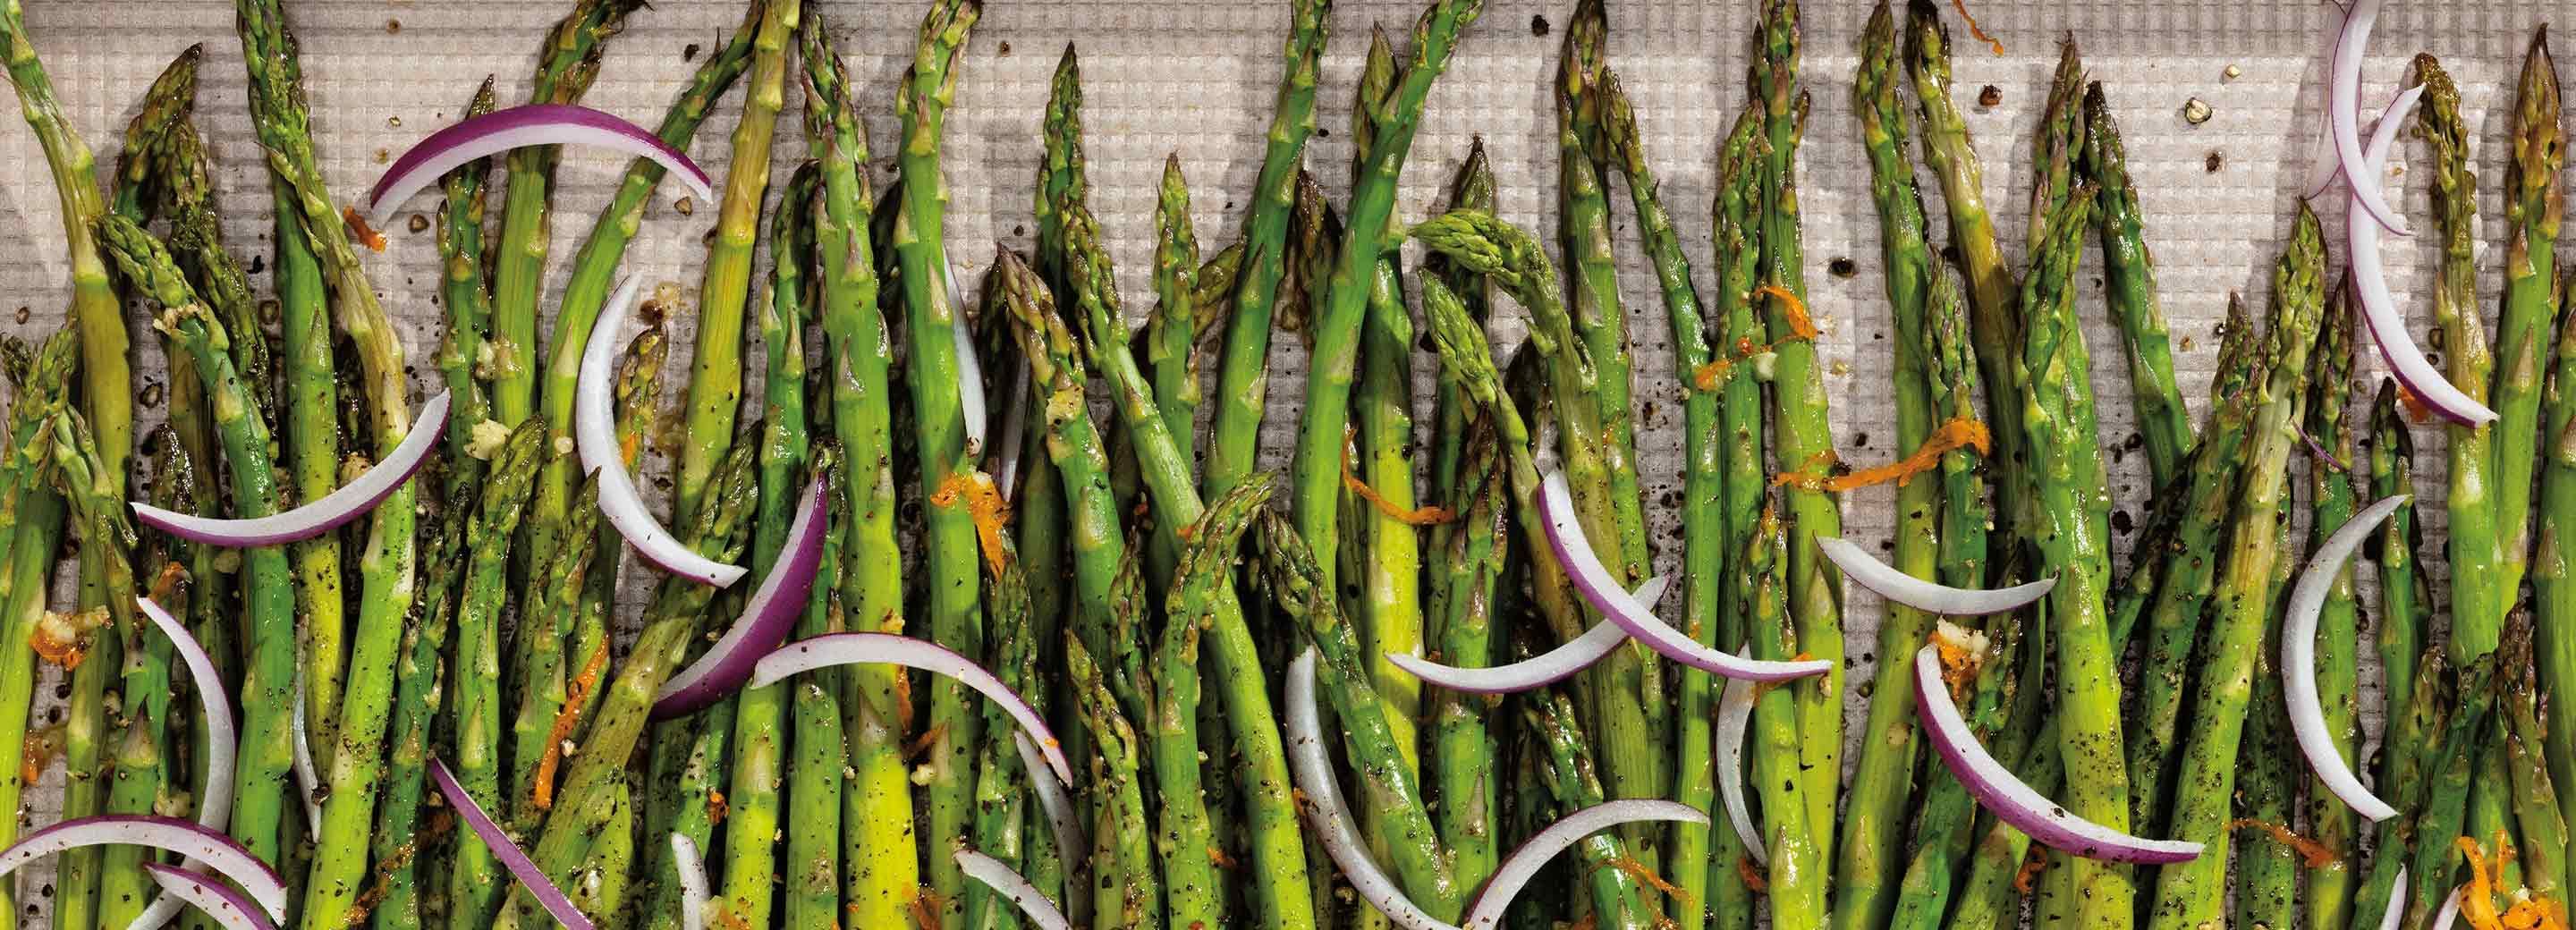 Roasted Asparagus and Red Onion